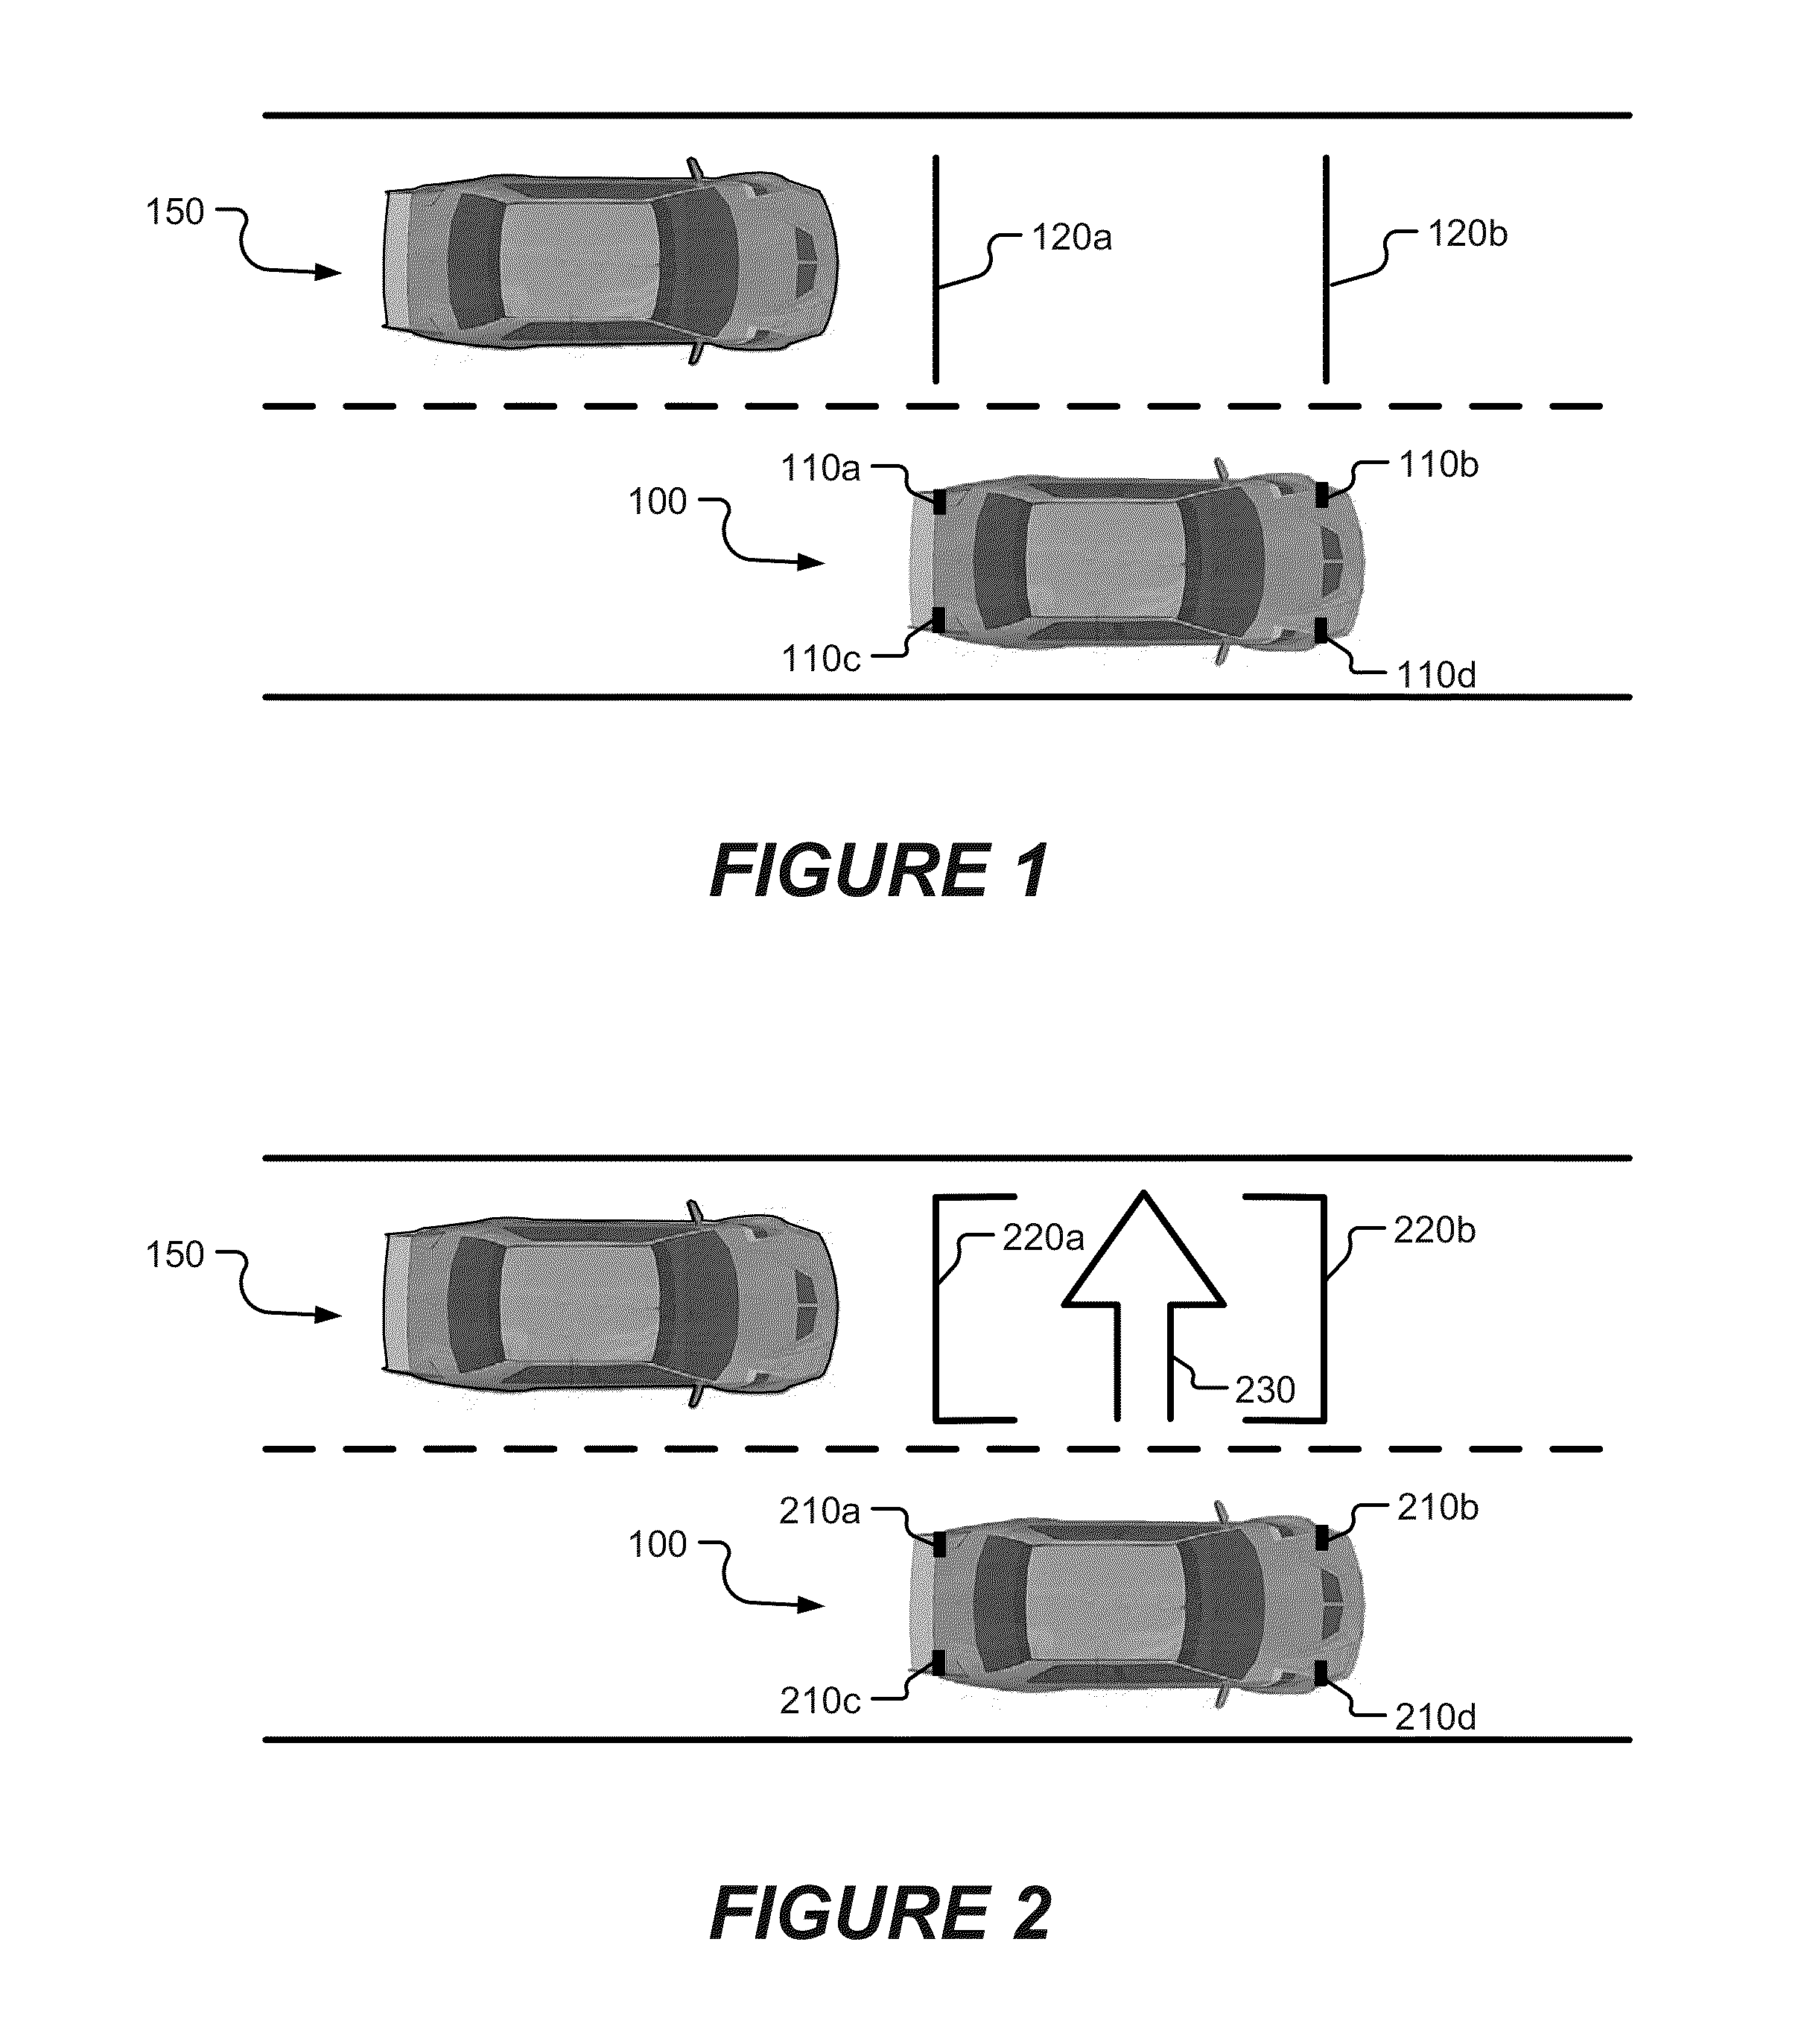 Vehicle turn signalling apparatuses with laser devices, light projection circuits, and related electromechanical actuators